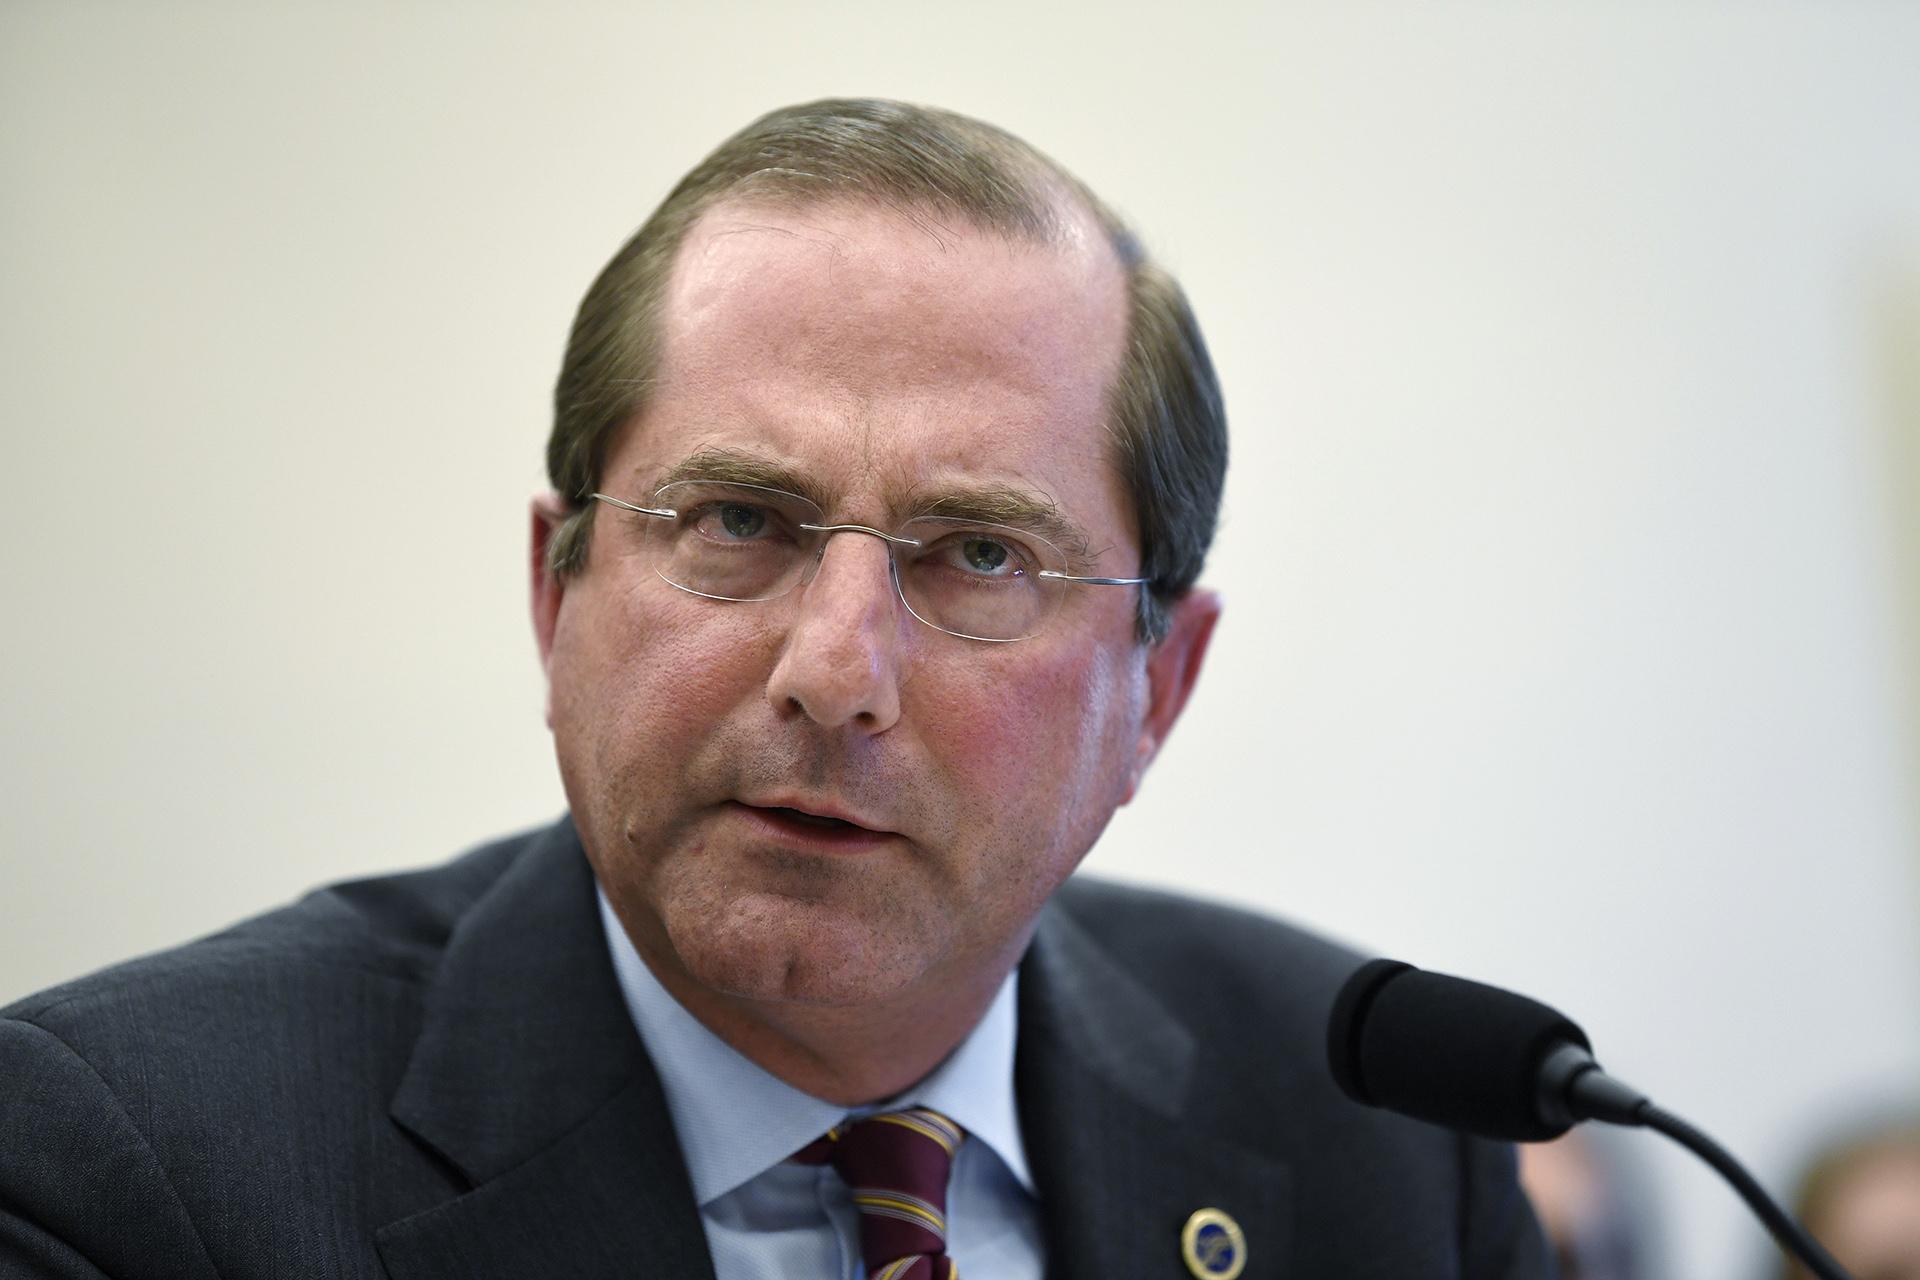 In this March 13, 2019 file photo, Health and Human Services Secretary Alex Azar testifies before a House Appropriations subcommittee on Capitol Hill in Washington. (AP Photo / Susan Walsh)